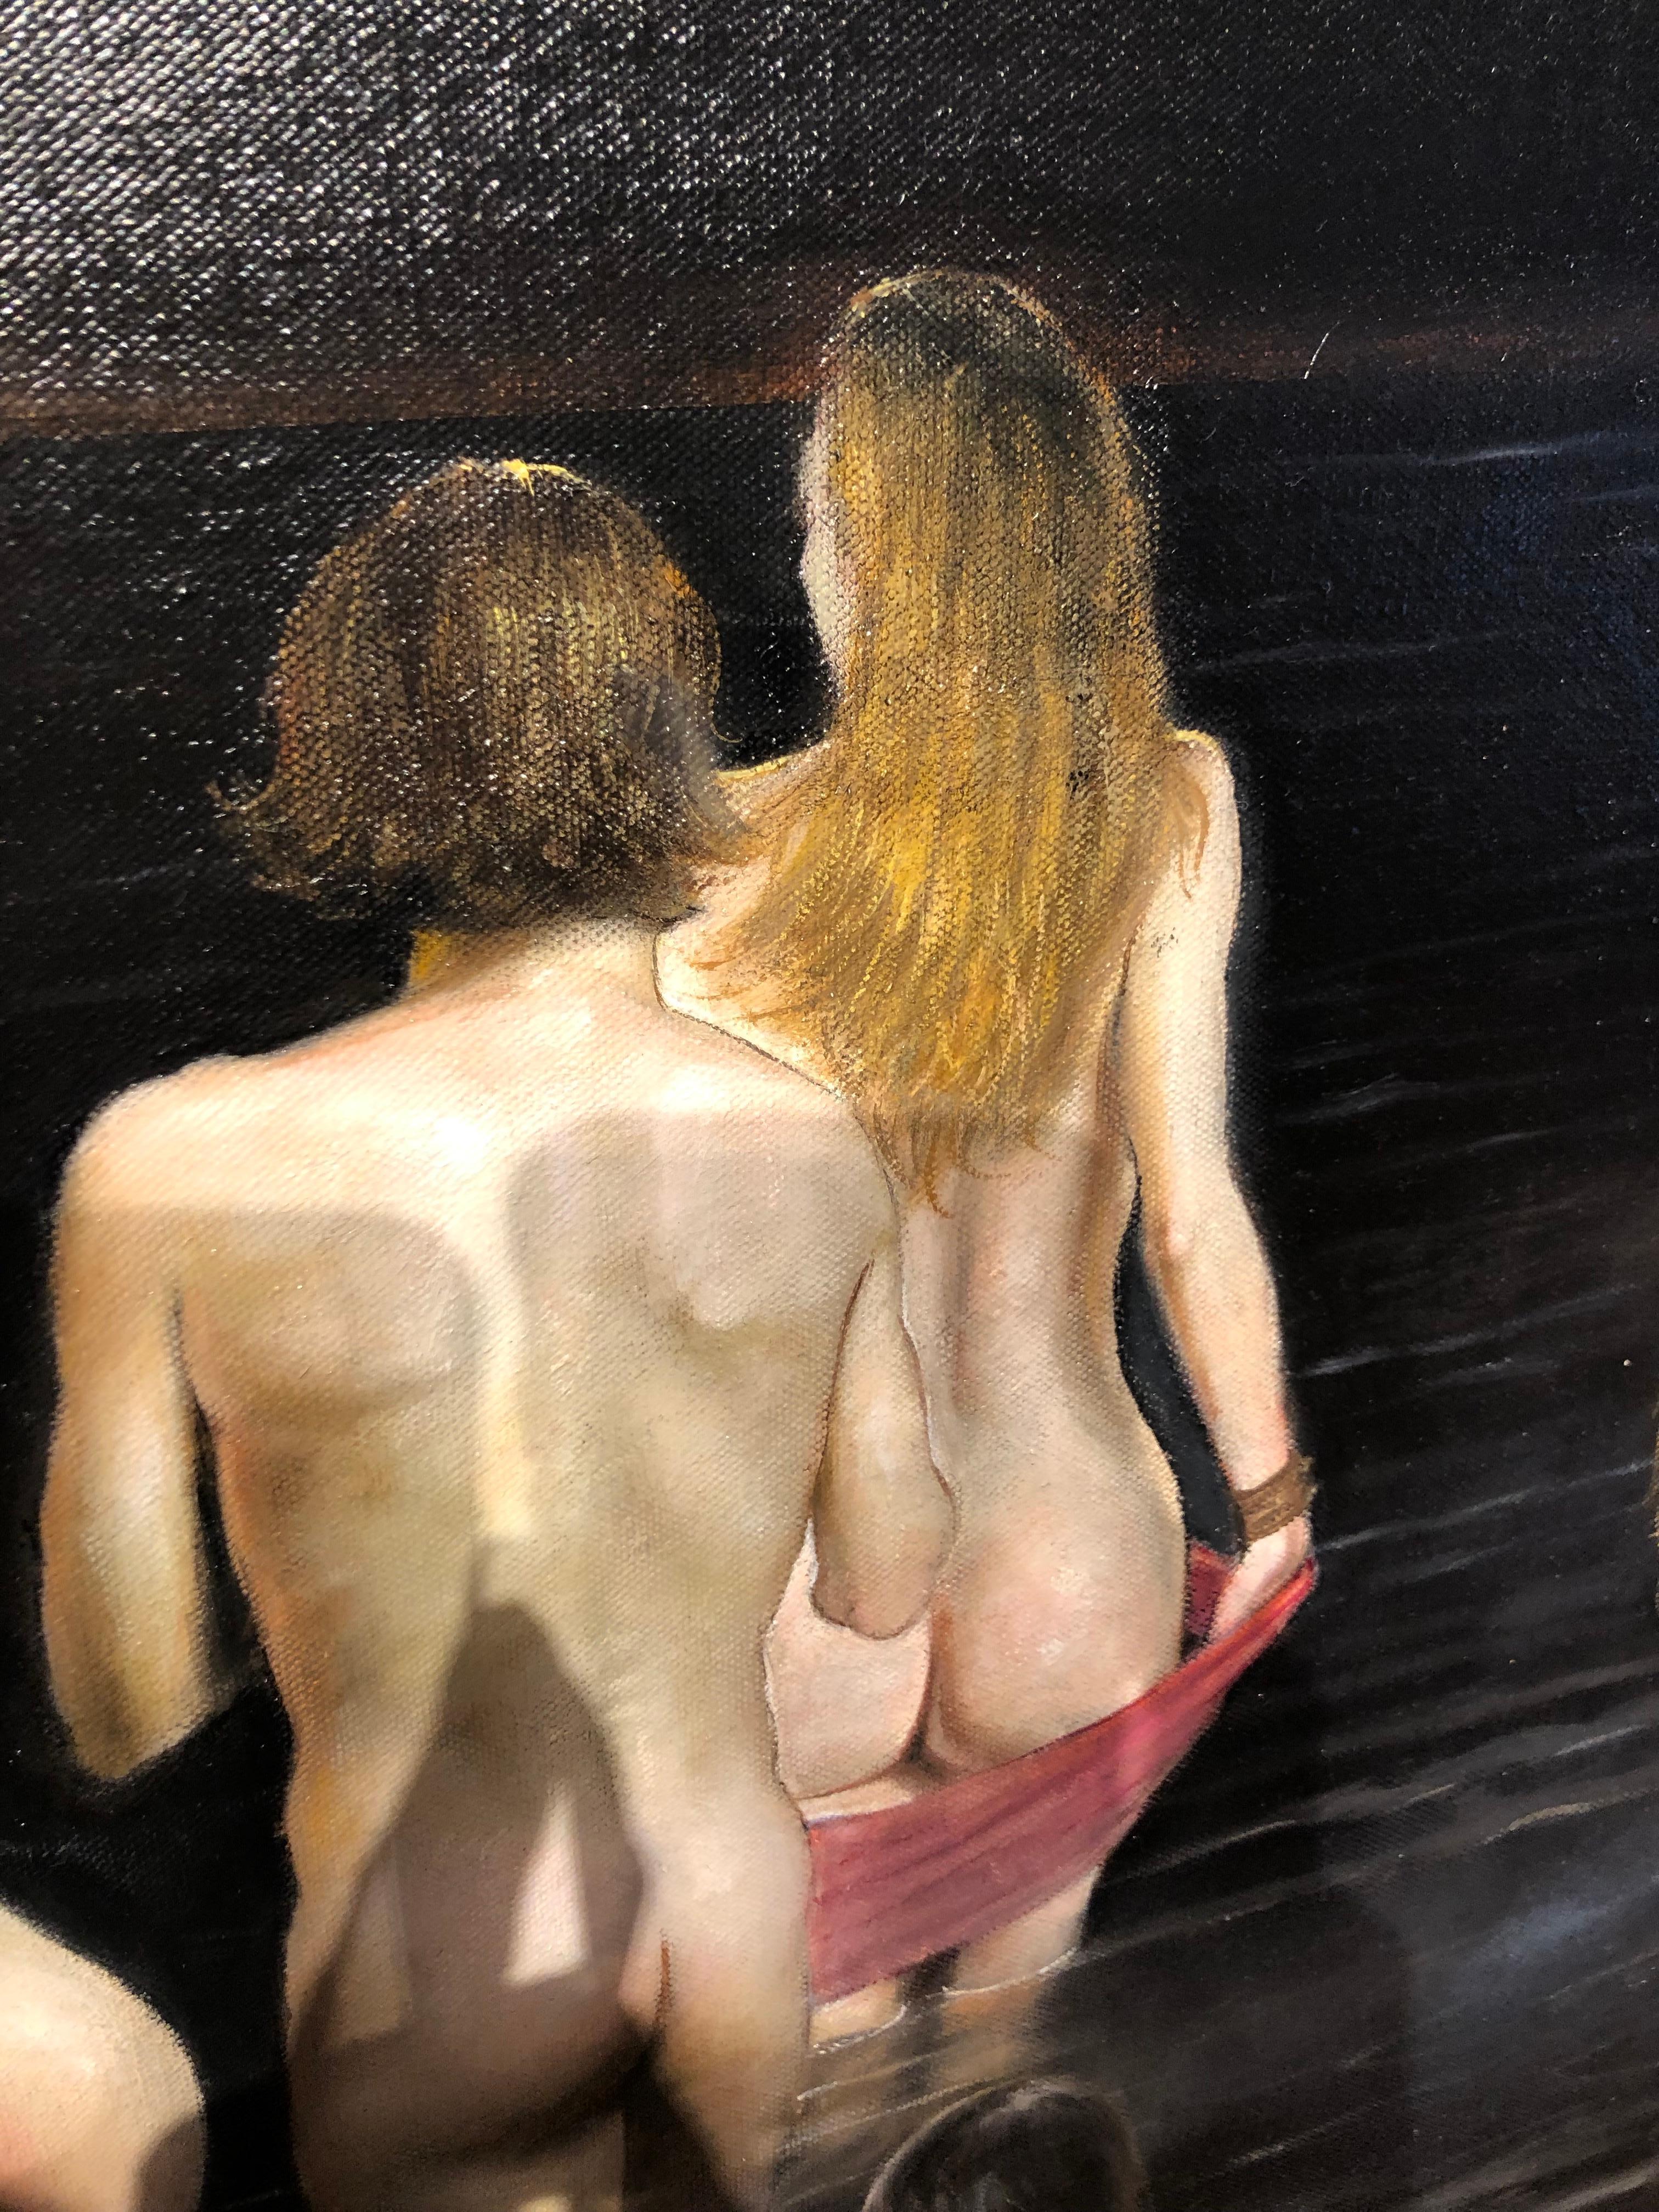 The Abyss - Original Oil Painting of Nude Figures Wandering Into a Body of Water - Black Nude Painting by Bruno Surdo